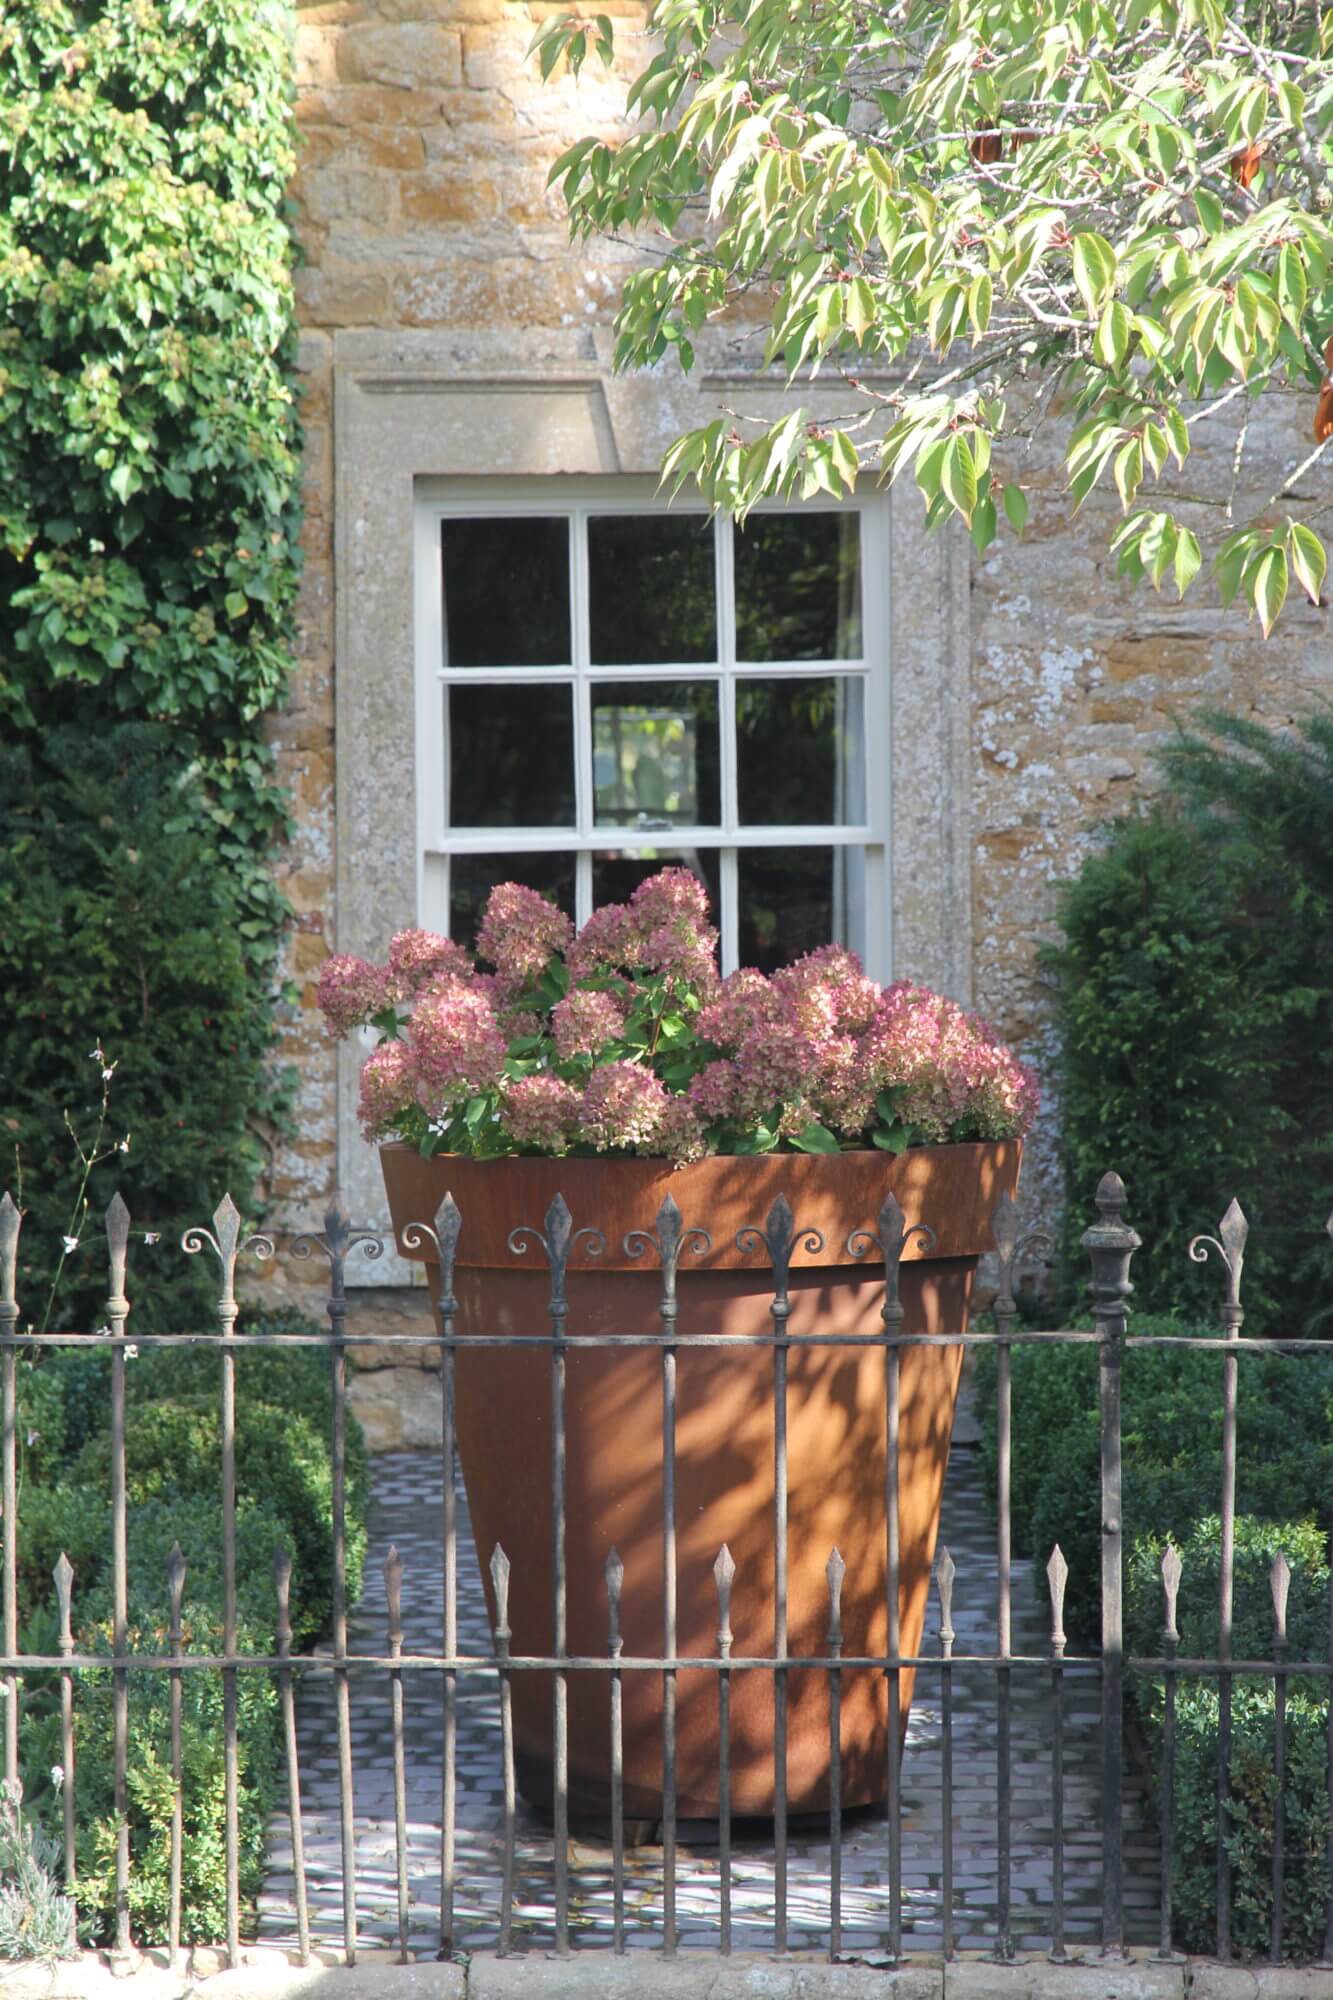 Aged rusty planter filled with hydrangea plants in front of sash window